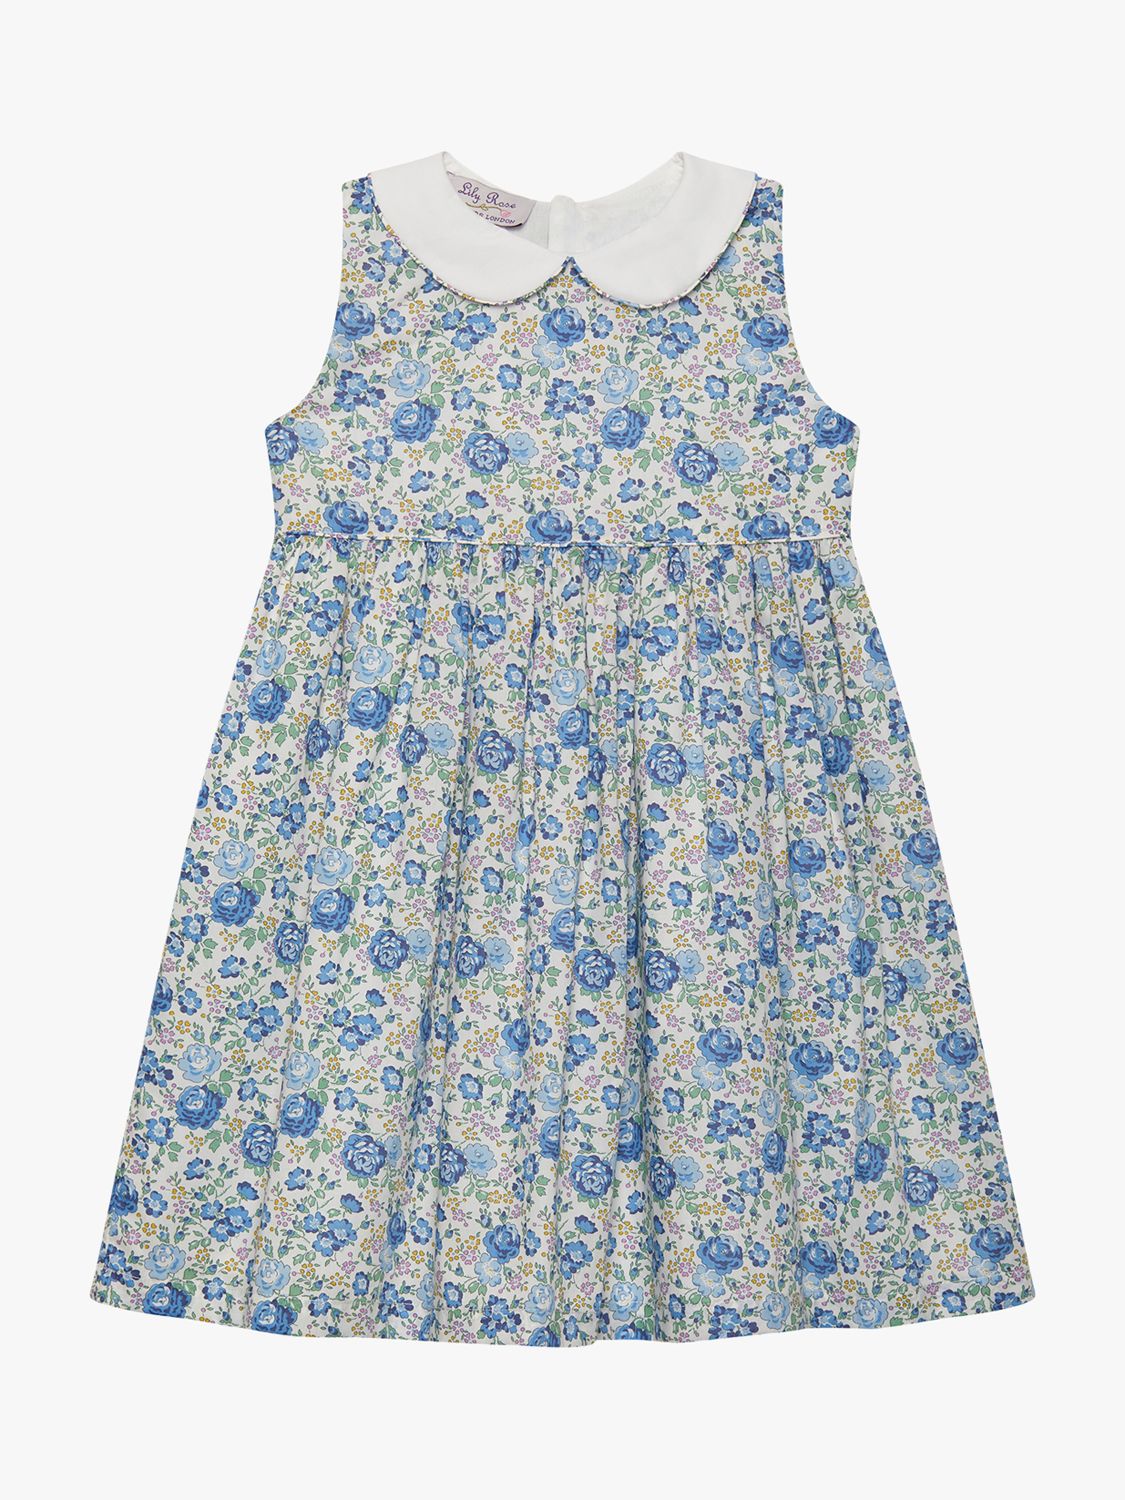 Trotters Kids' Liberty's Felicite Floral Print Peter Pan Collar Sleeveless Dress, Blue, 2 years